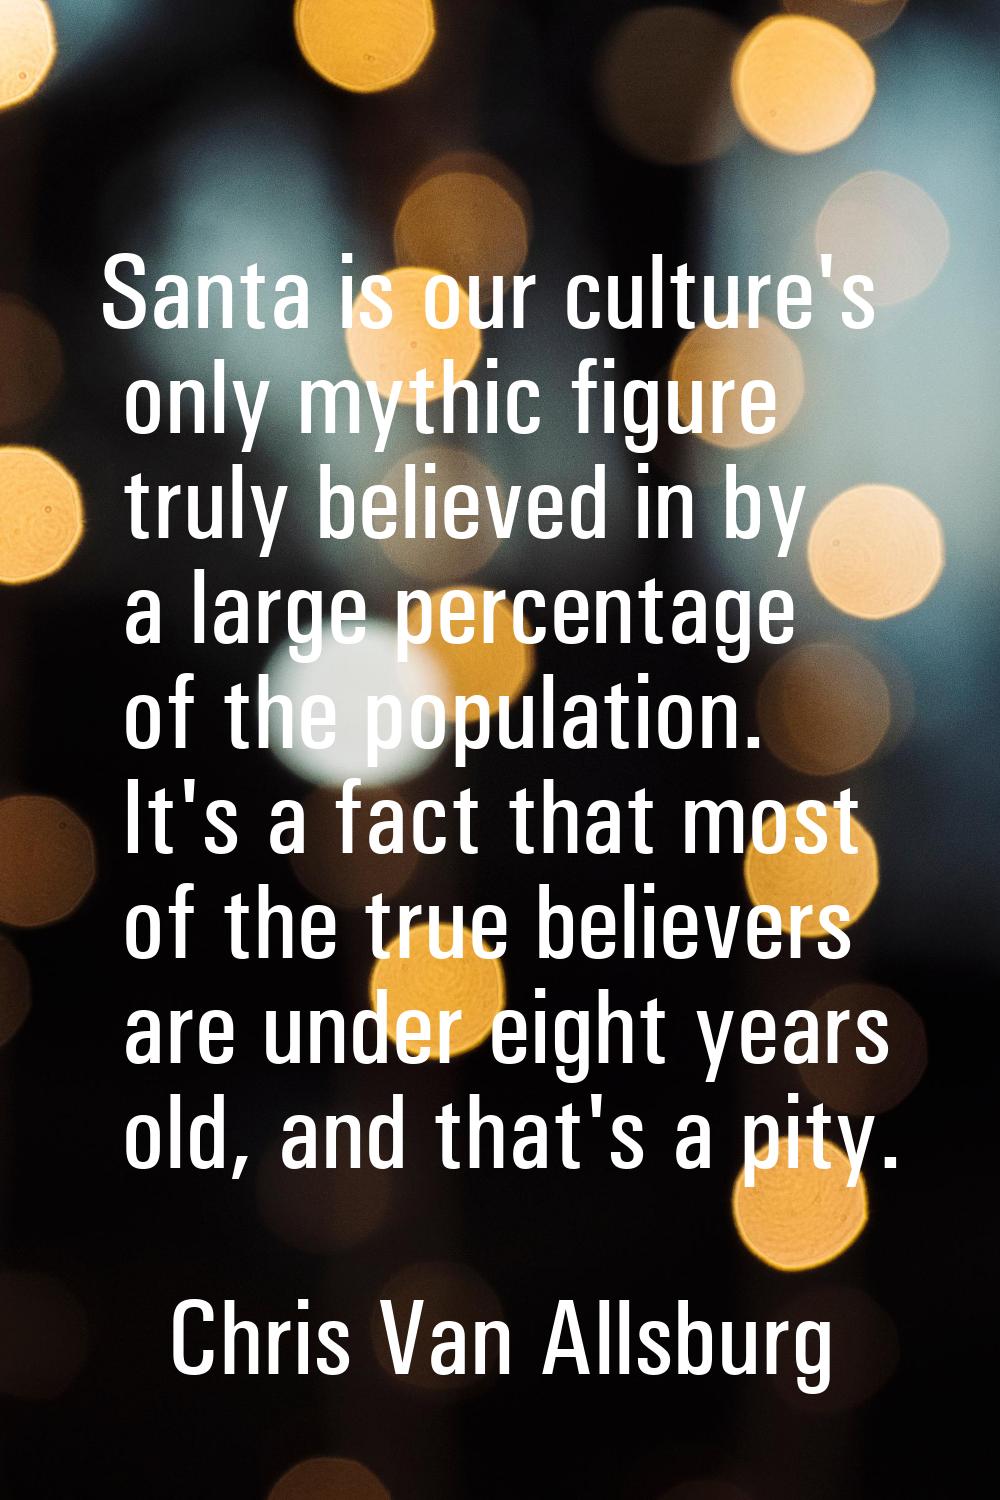 Santa is our culture's only mythic figure truly believed in by a large percentage of the population